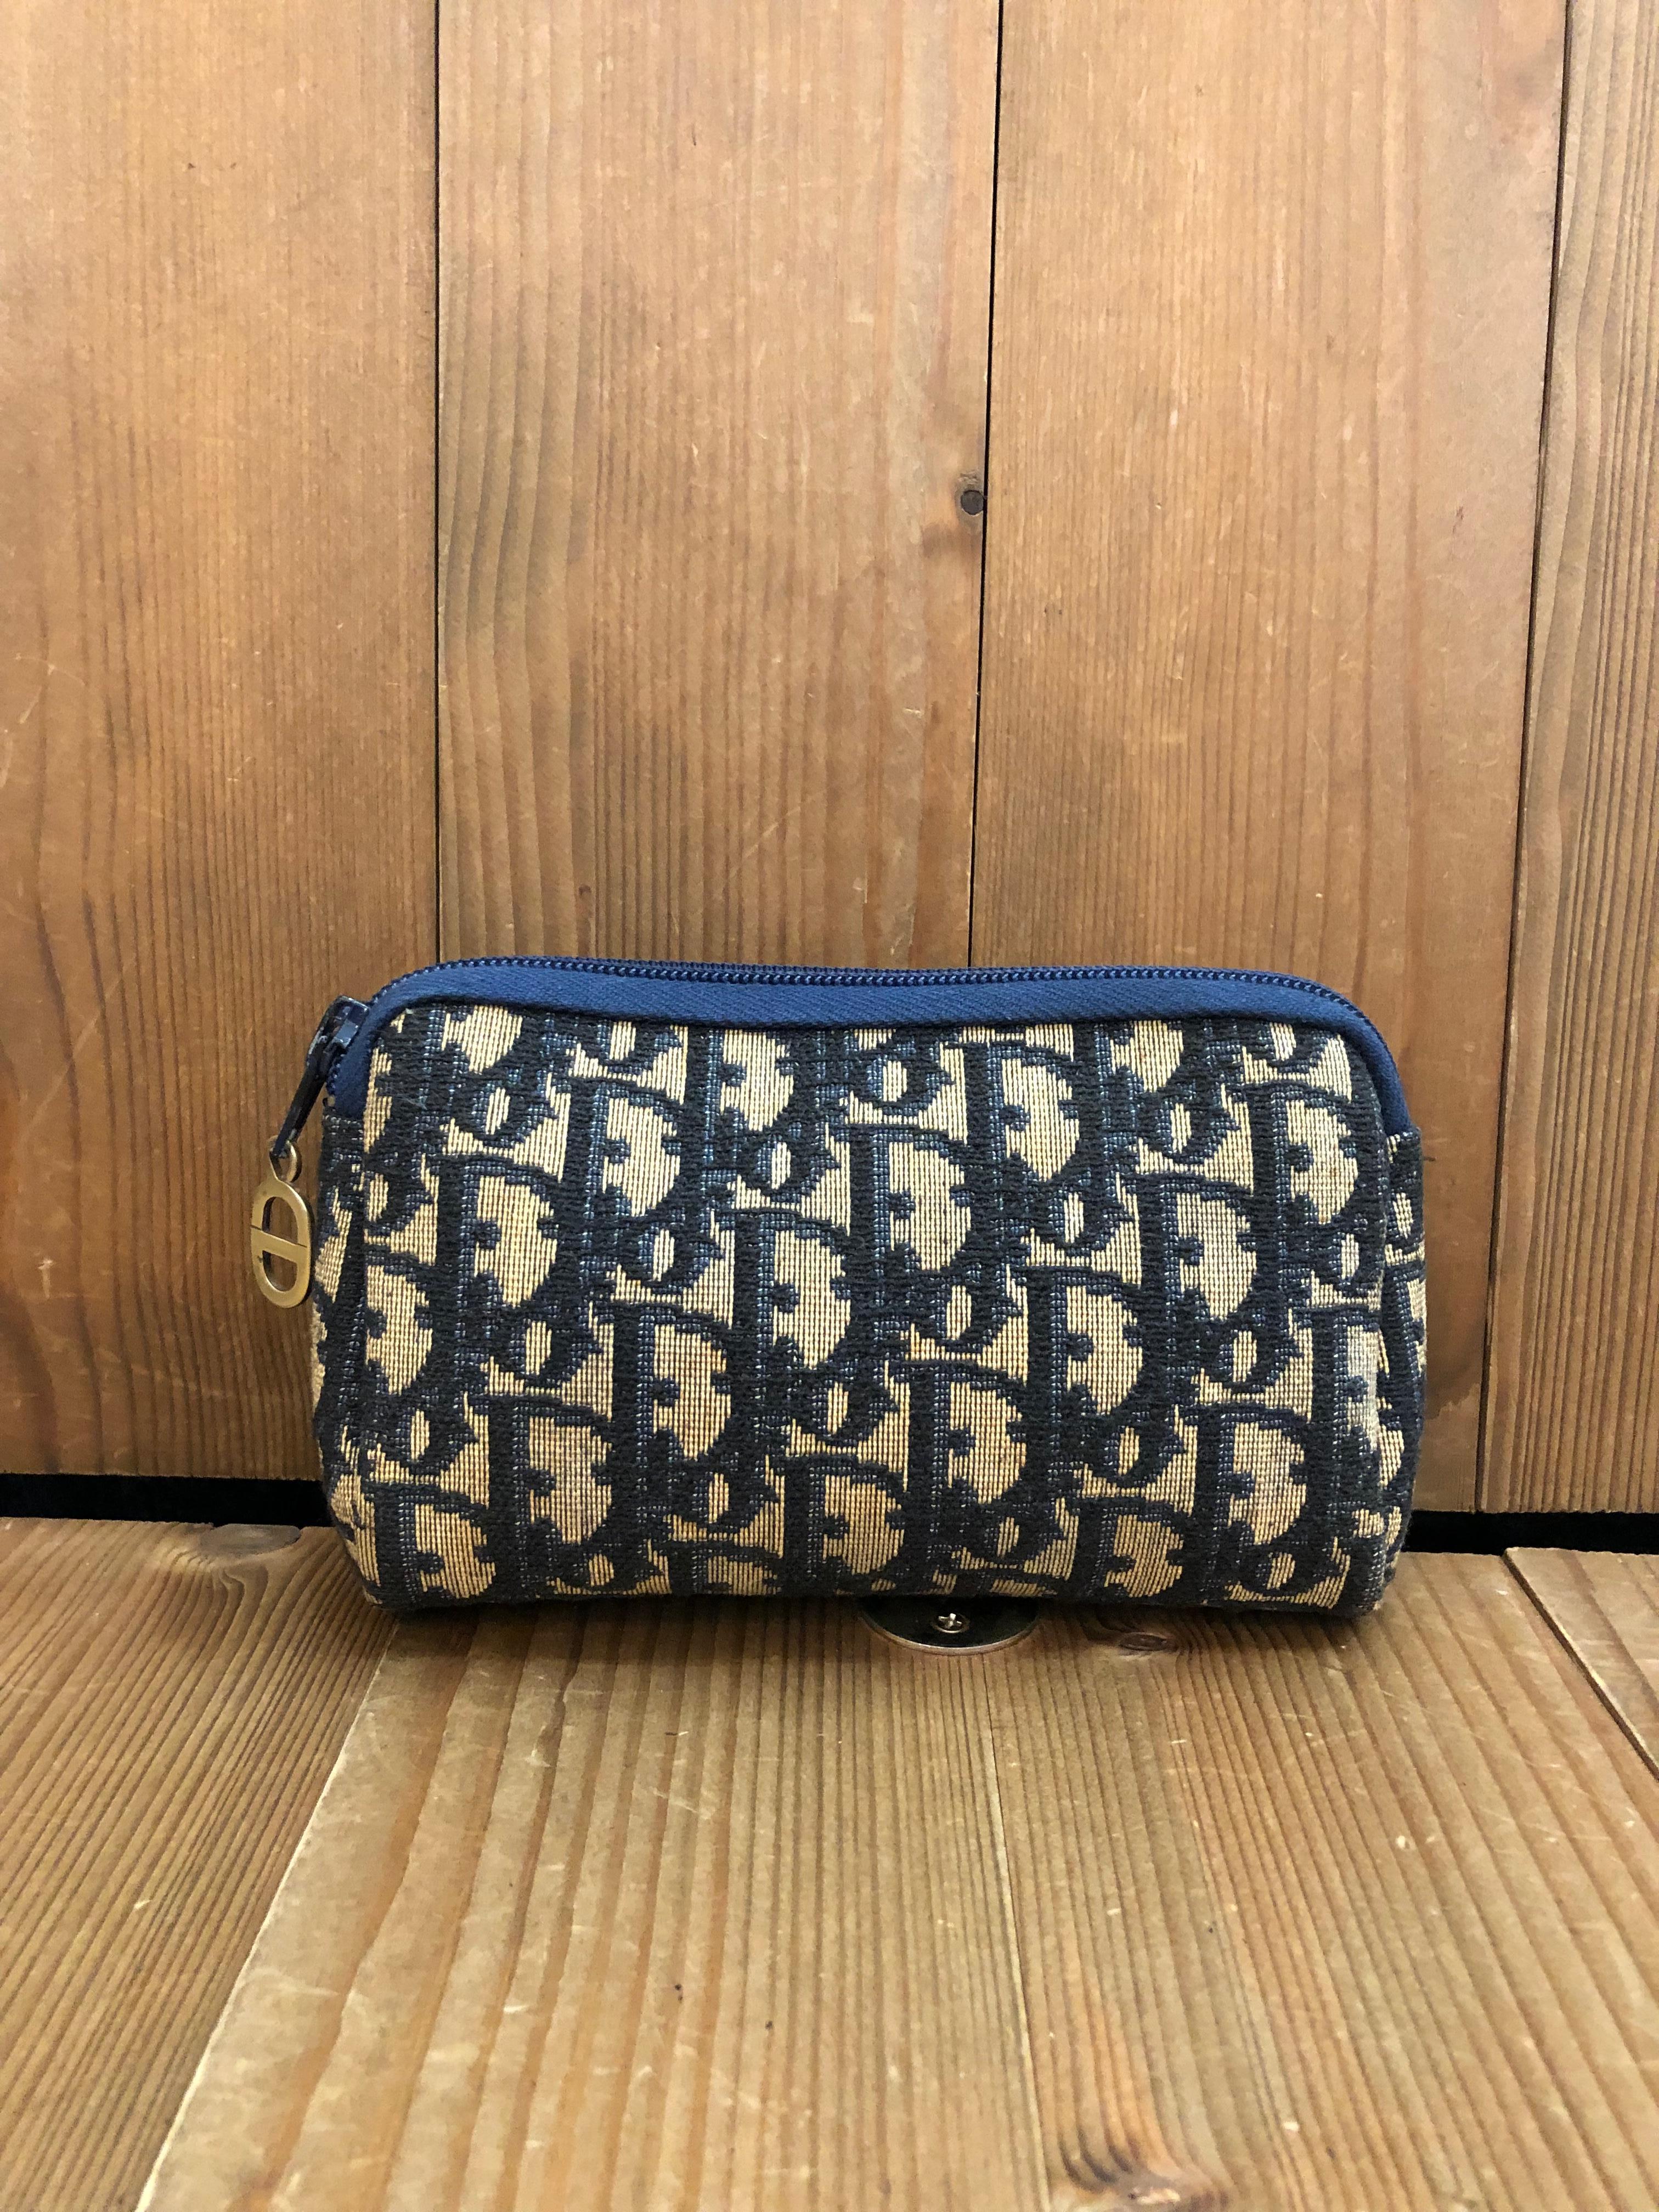 This Vintage CHRISTIAN DIOR mini vanity pouch is crafted of Dior signature Trotter jacquard in navy. Top zipper closure opens to a coated interior in navy. Made in France. Measures approximately 6 x 4 x 1.5 inches. 

Condition - Good vintage